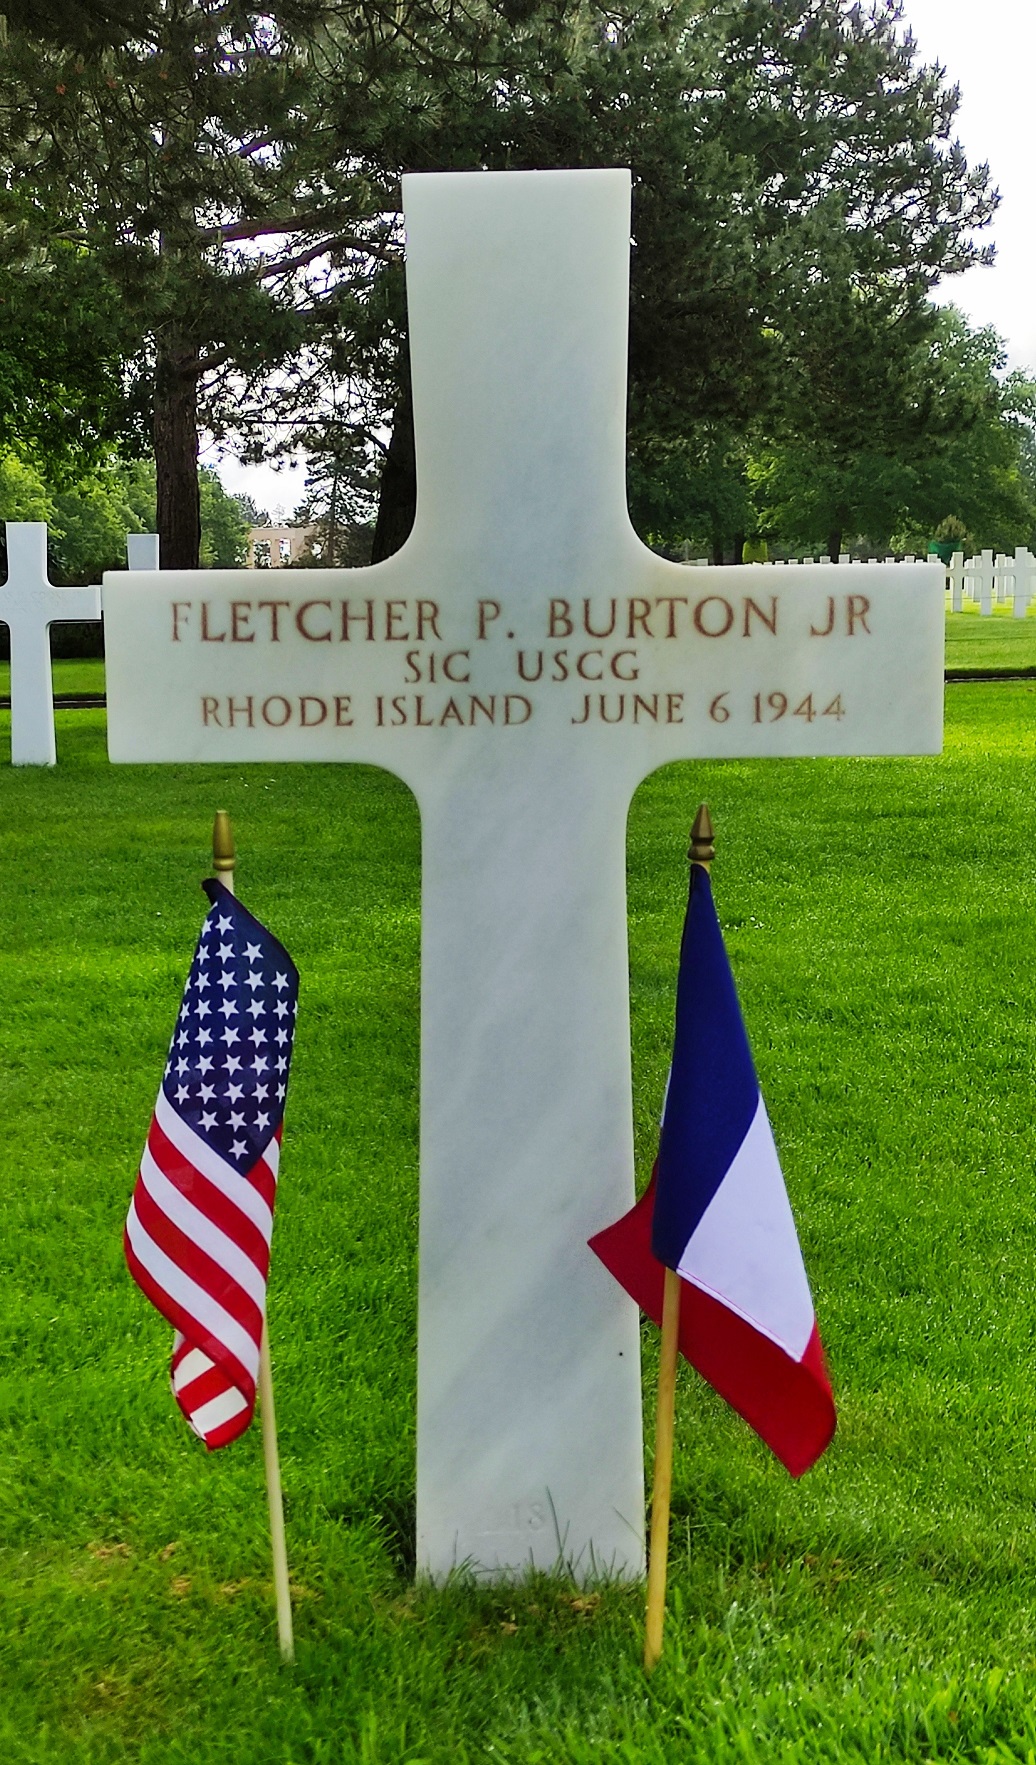 Seaman First Class Fletcher Burton’s headstone located at the Normandy American Cemetery at Colleville-sur-Mer, France. (American Battle Monuments Commission, Emmanuelle Hotier)